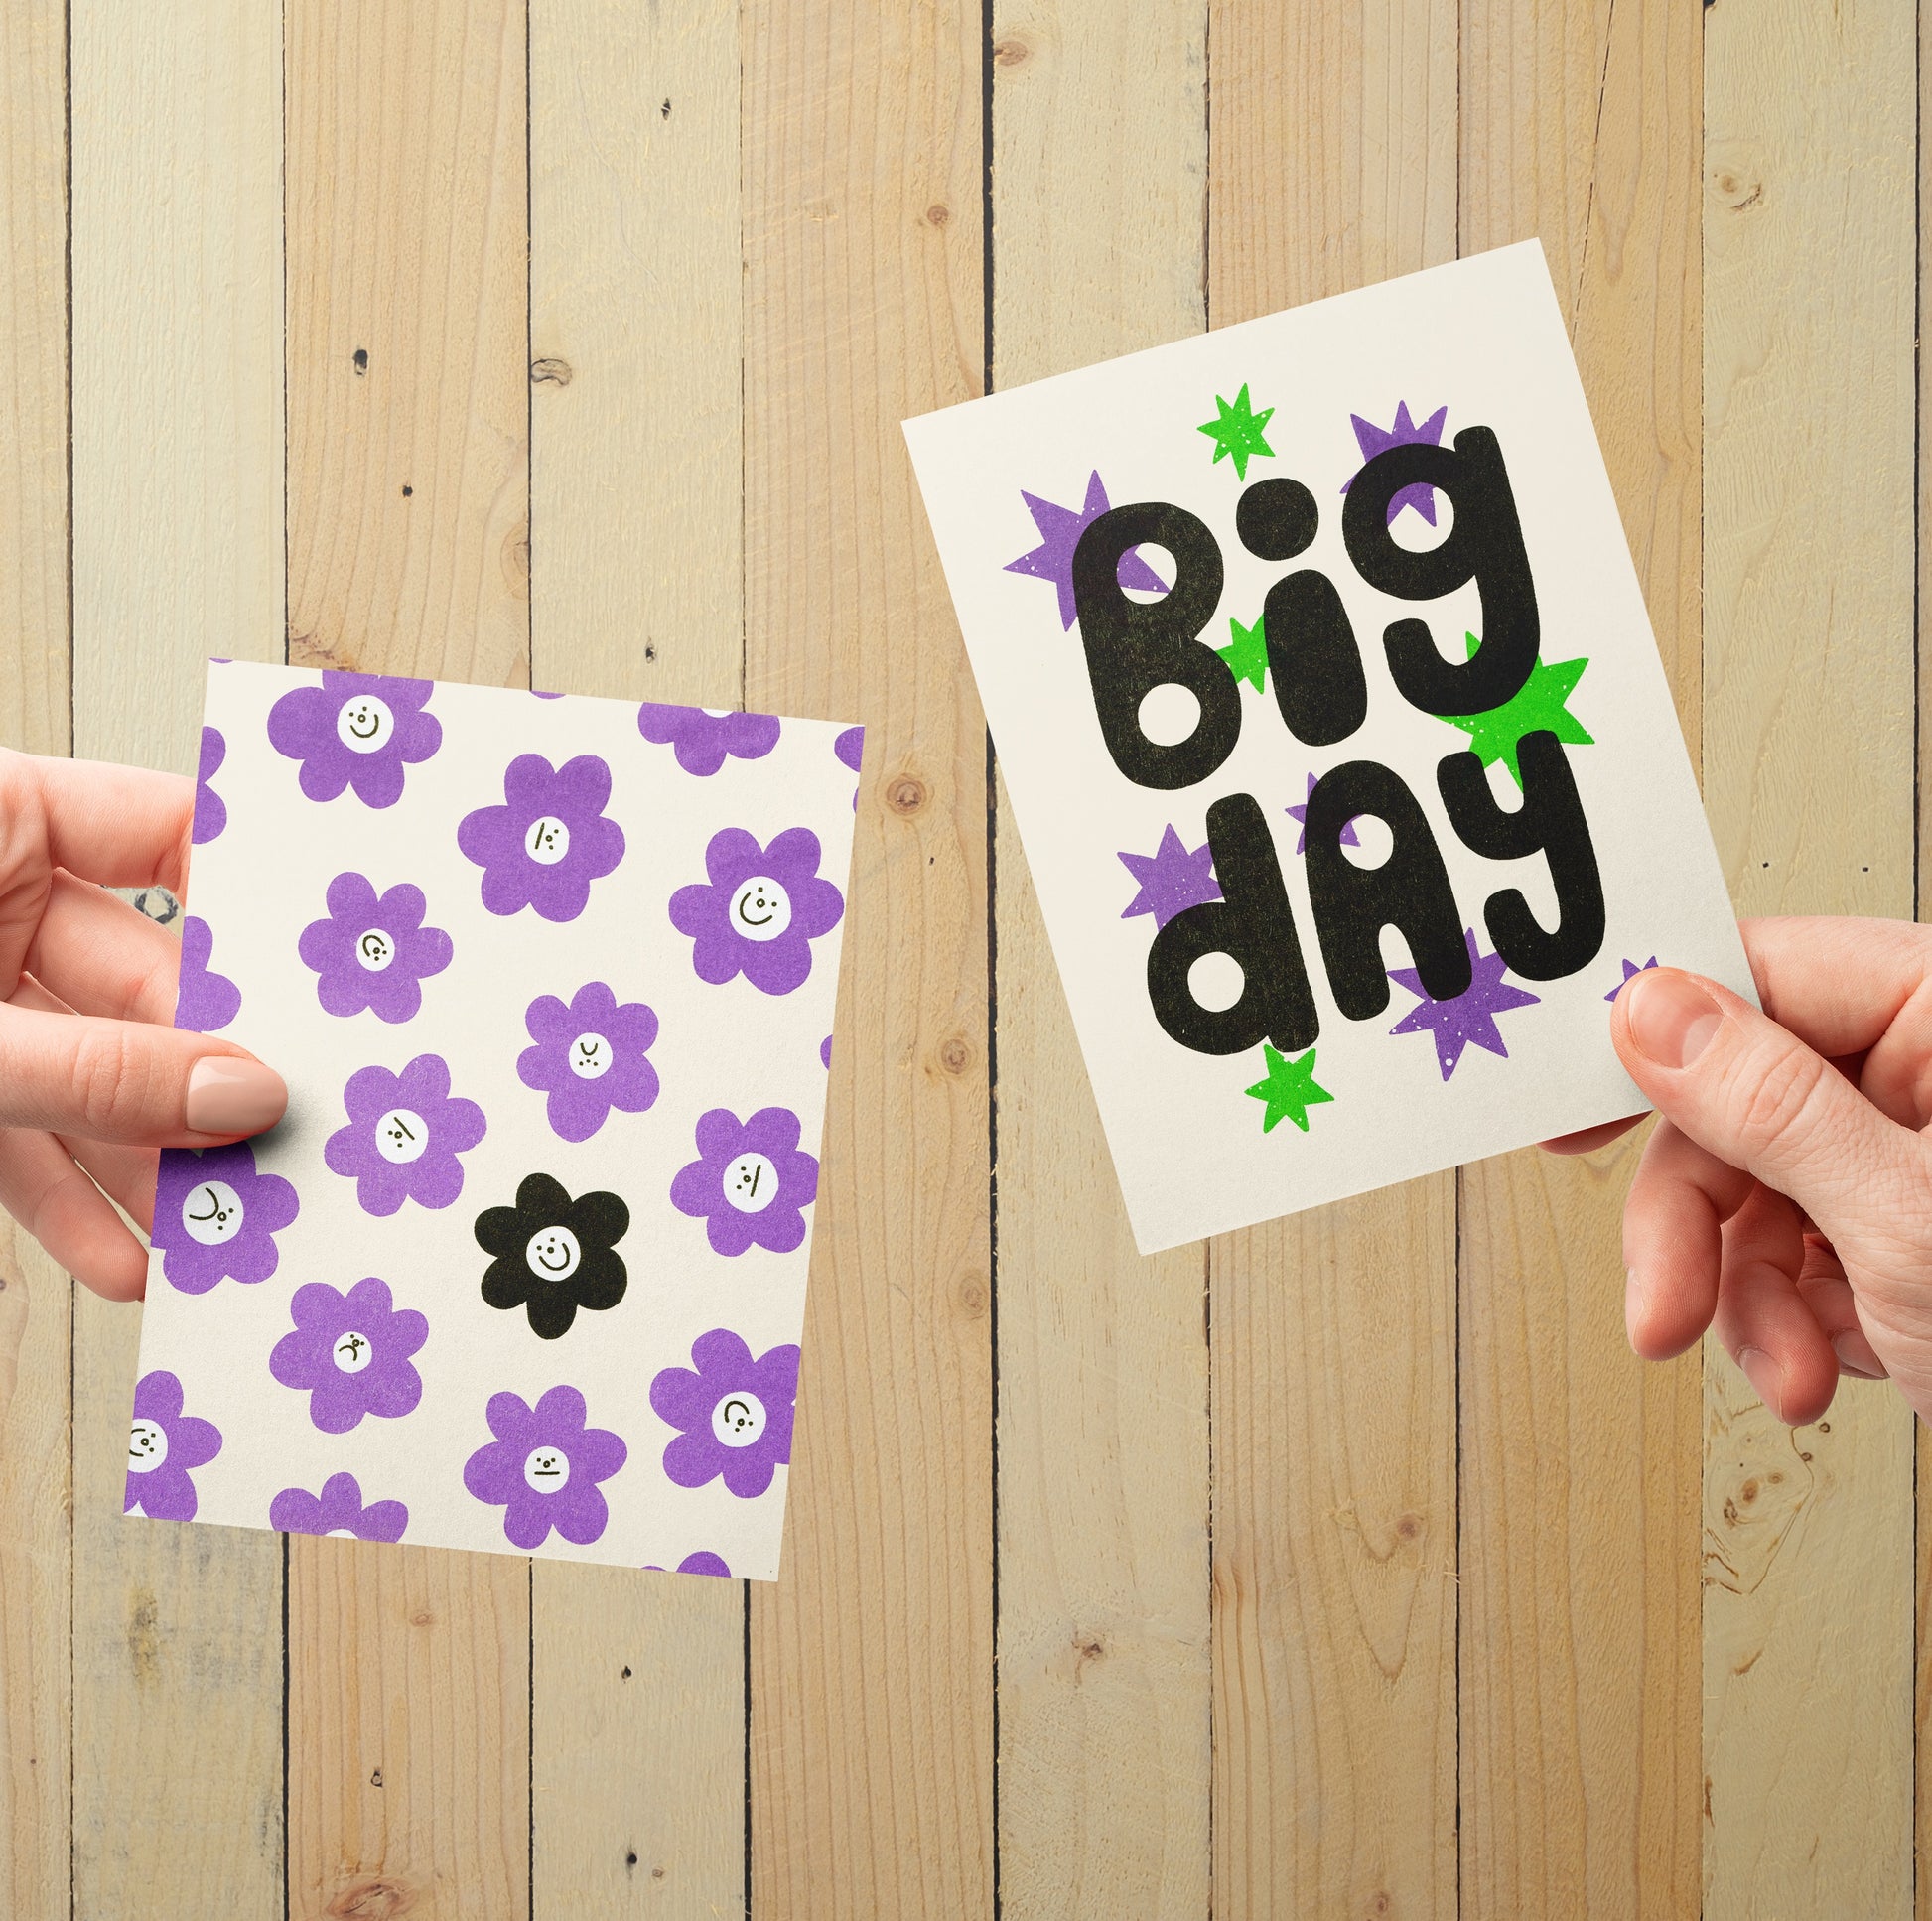 Two hands holding up risograph printed greeting cards, in front of a light wood panel background.